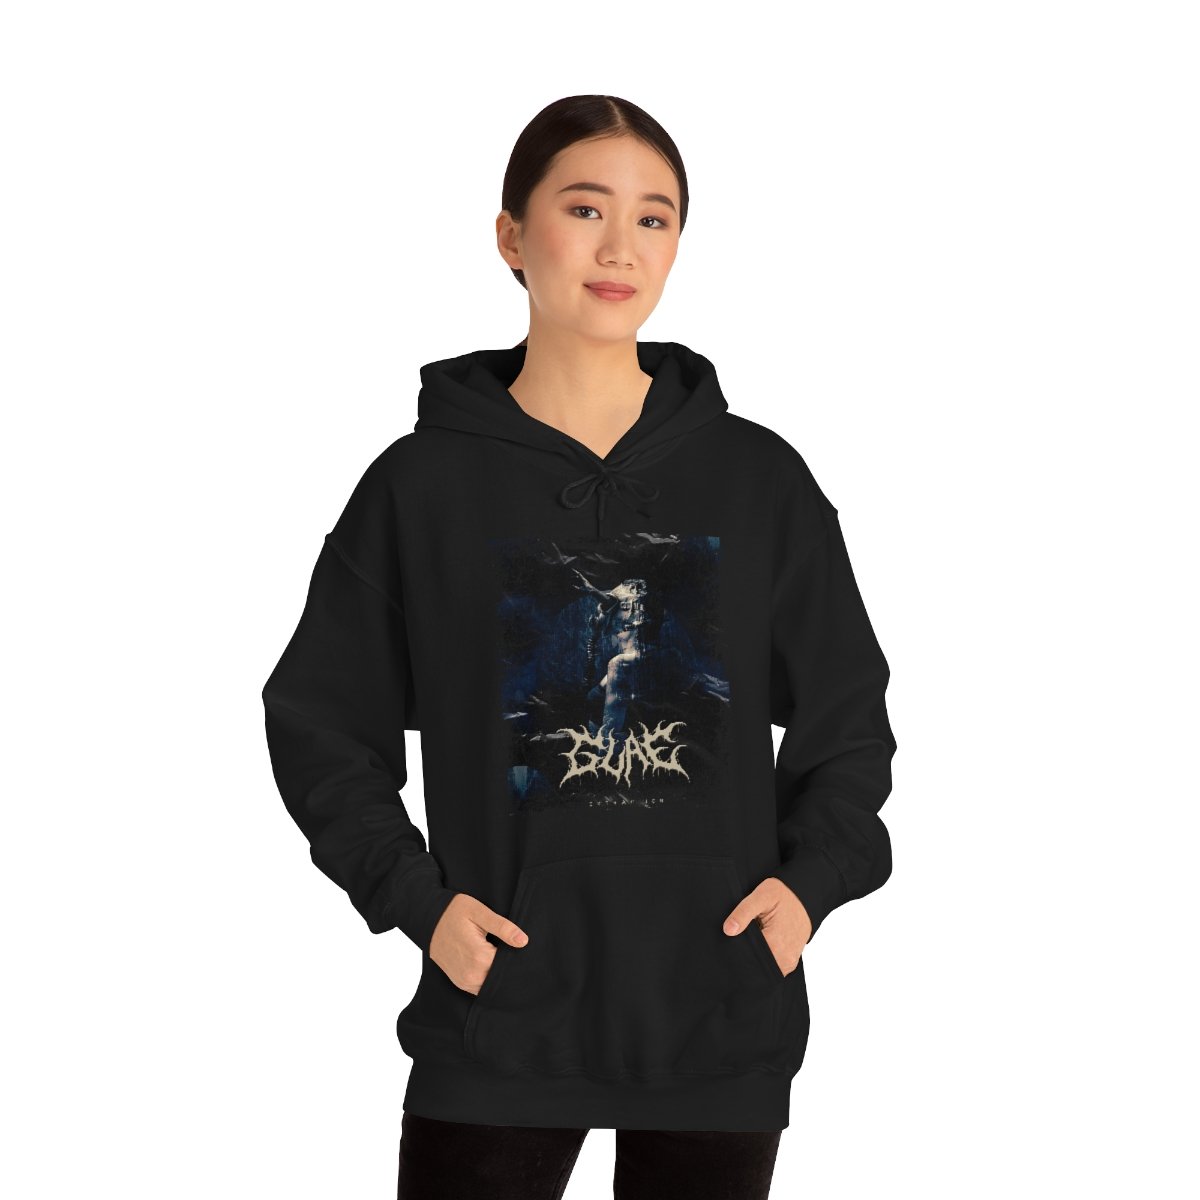 Glae – Extraction Pullover Hooded Sweatshirt 18500